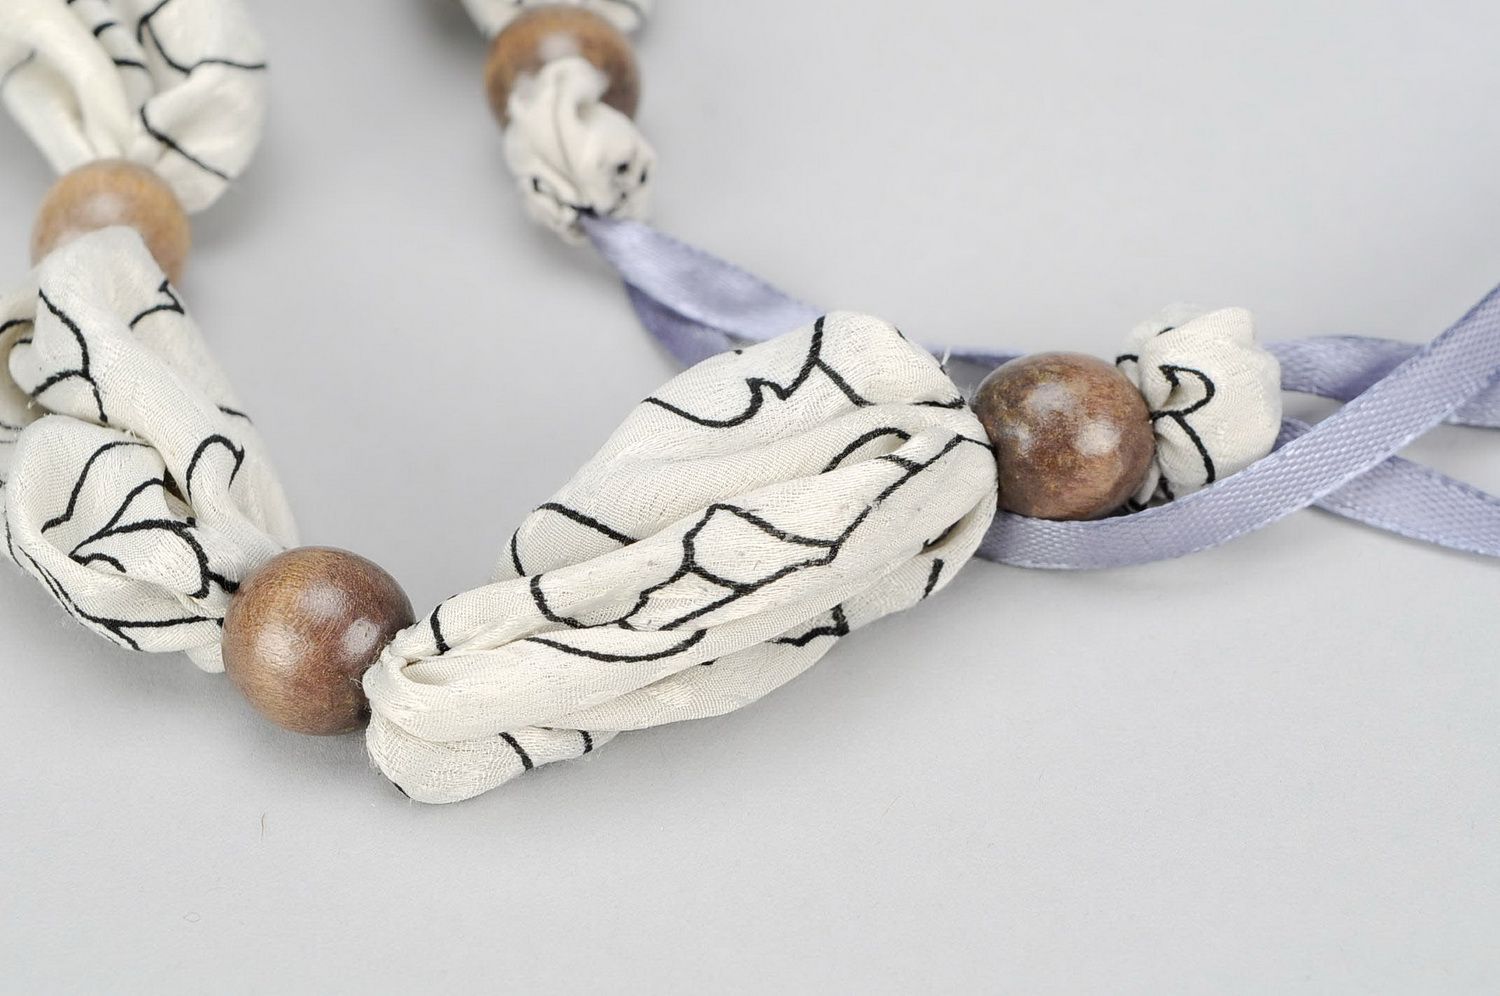 Beads made of wood and satin Elegant Gray photo 3